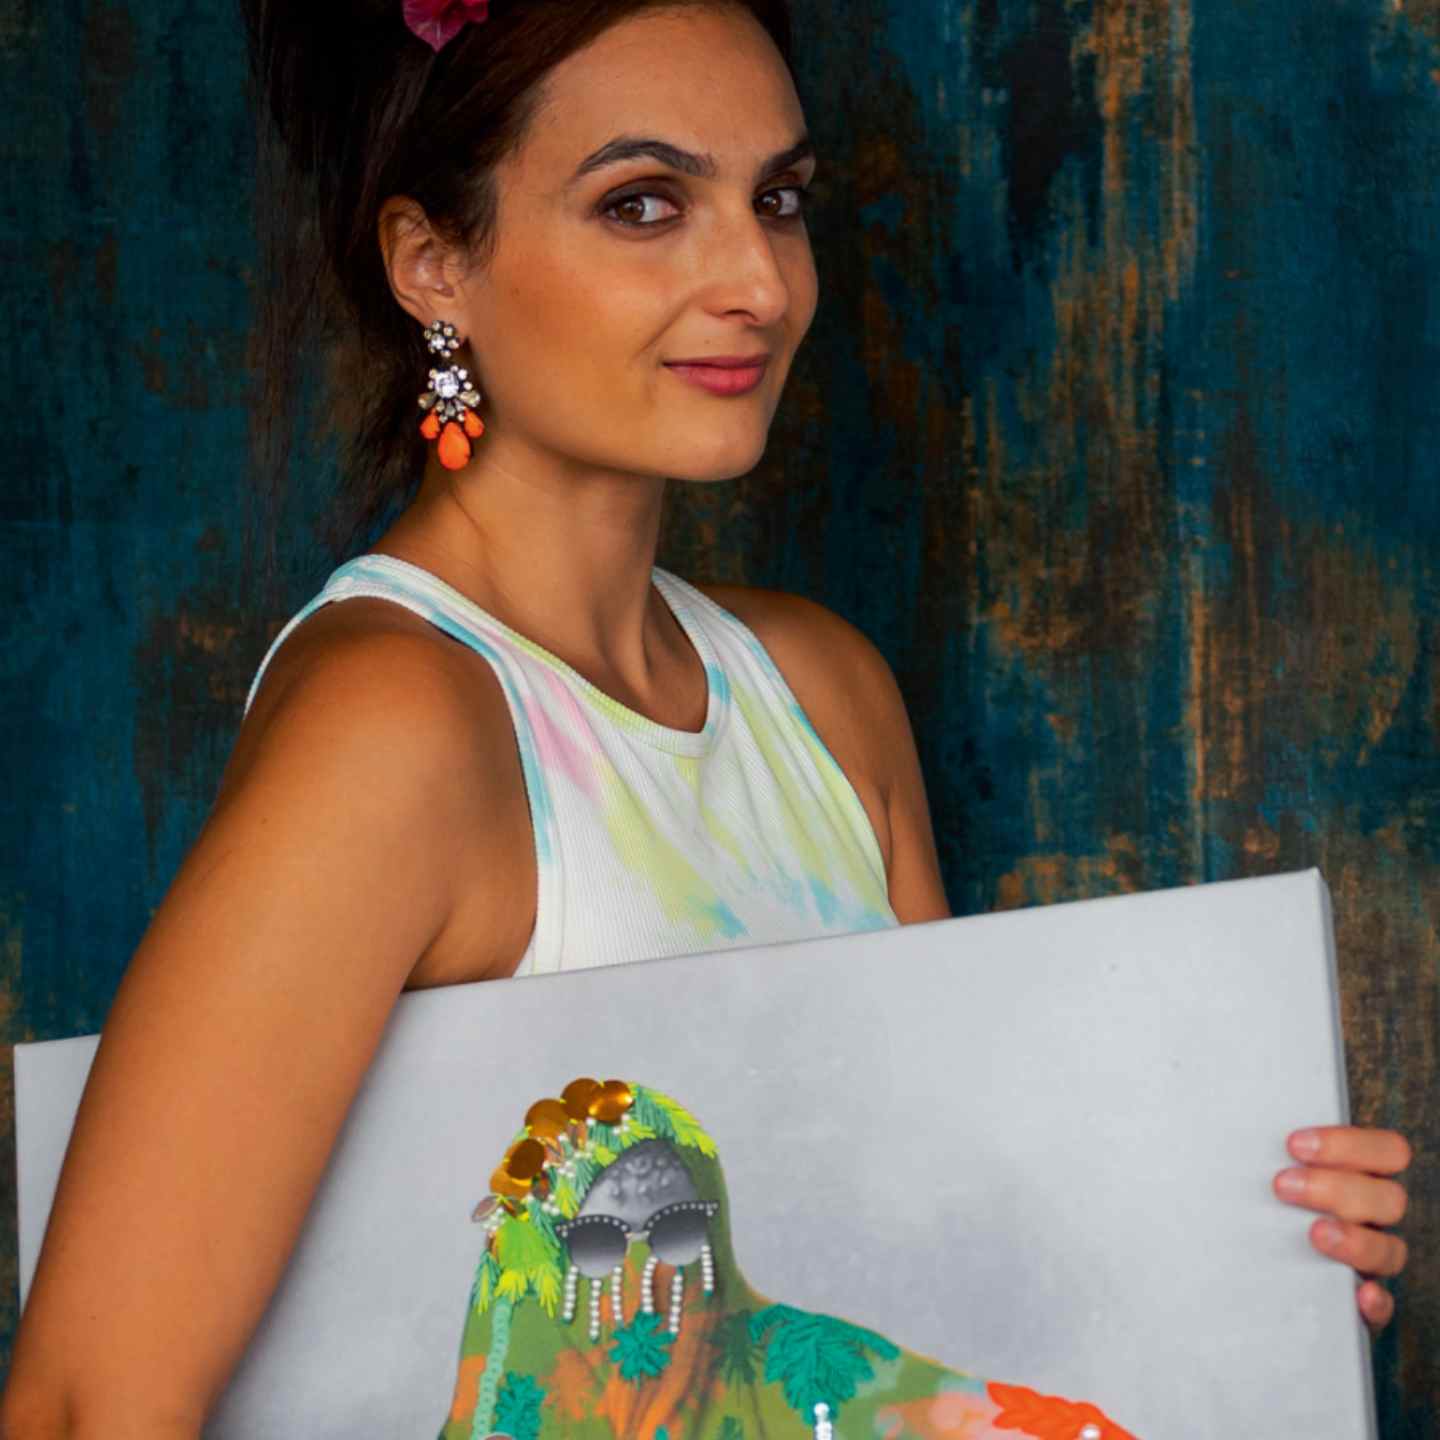 Woman with large elaborate earrings poses with a piece of artwork against a blue background